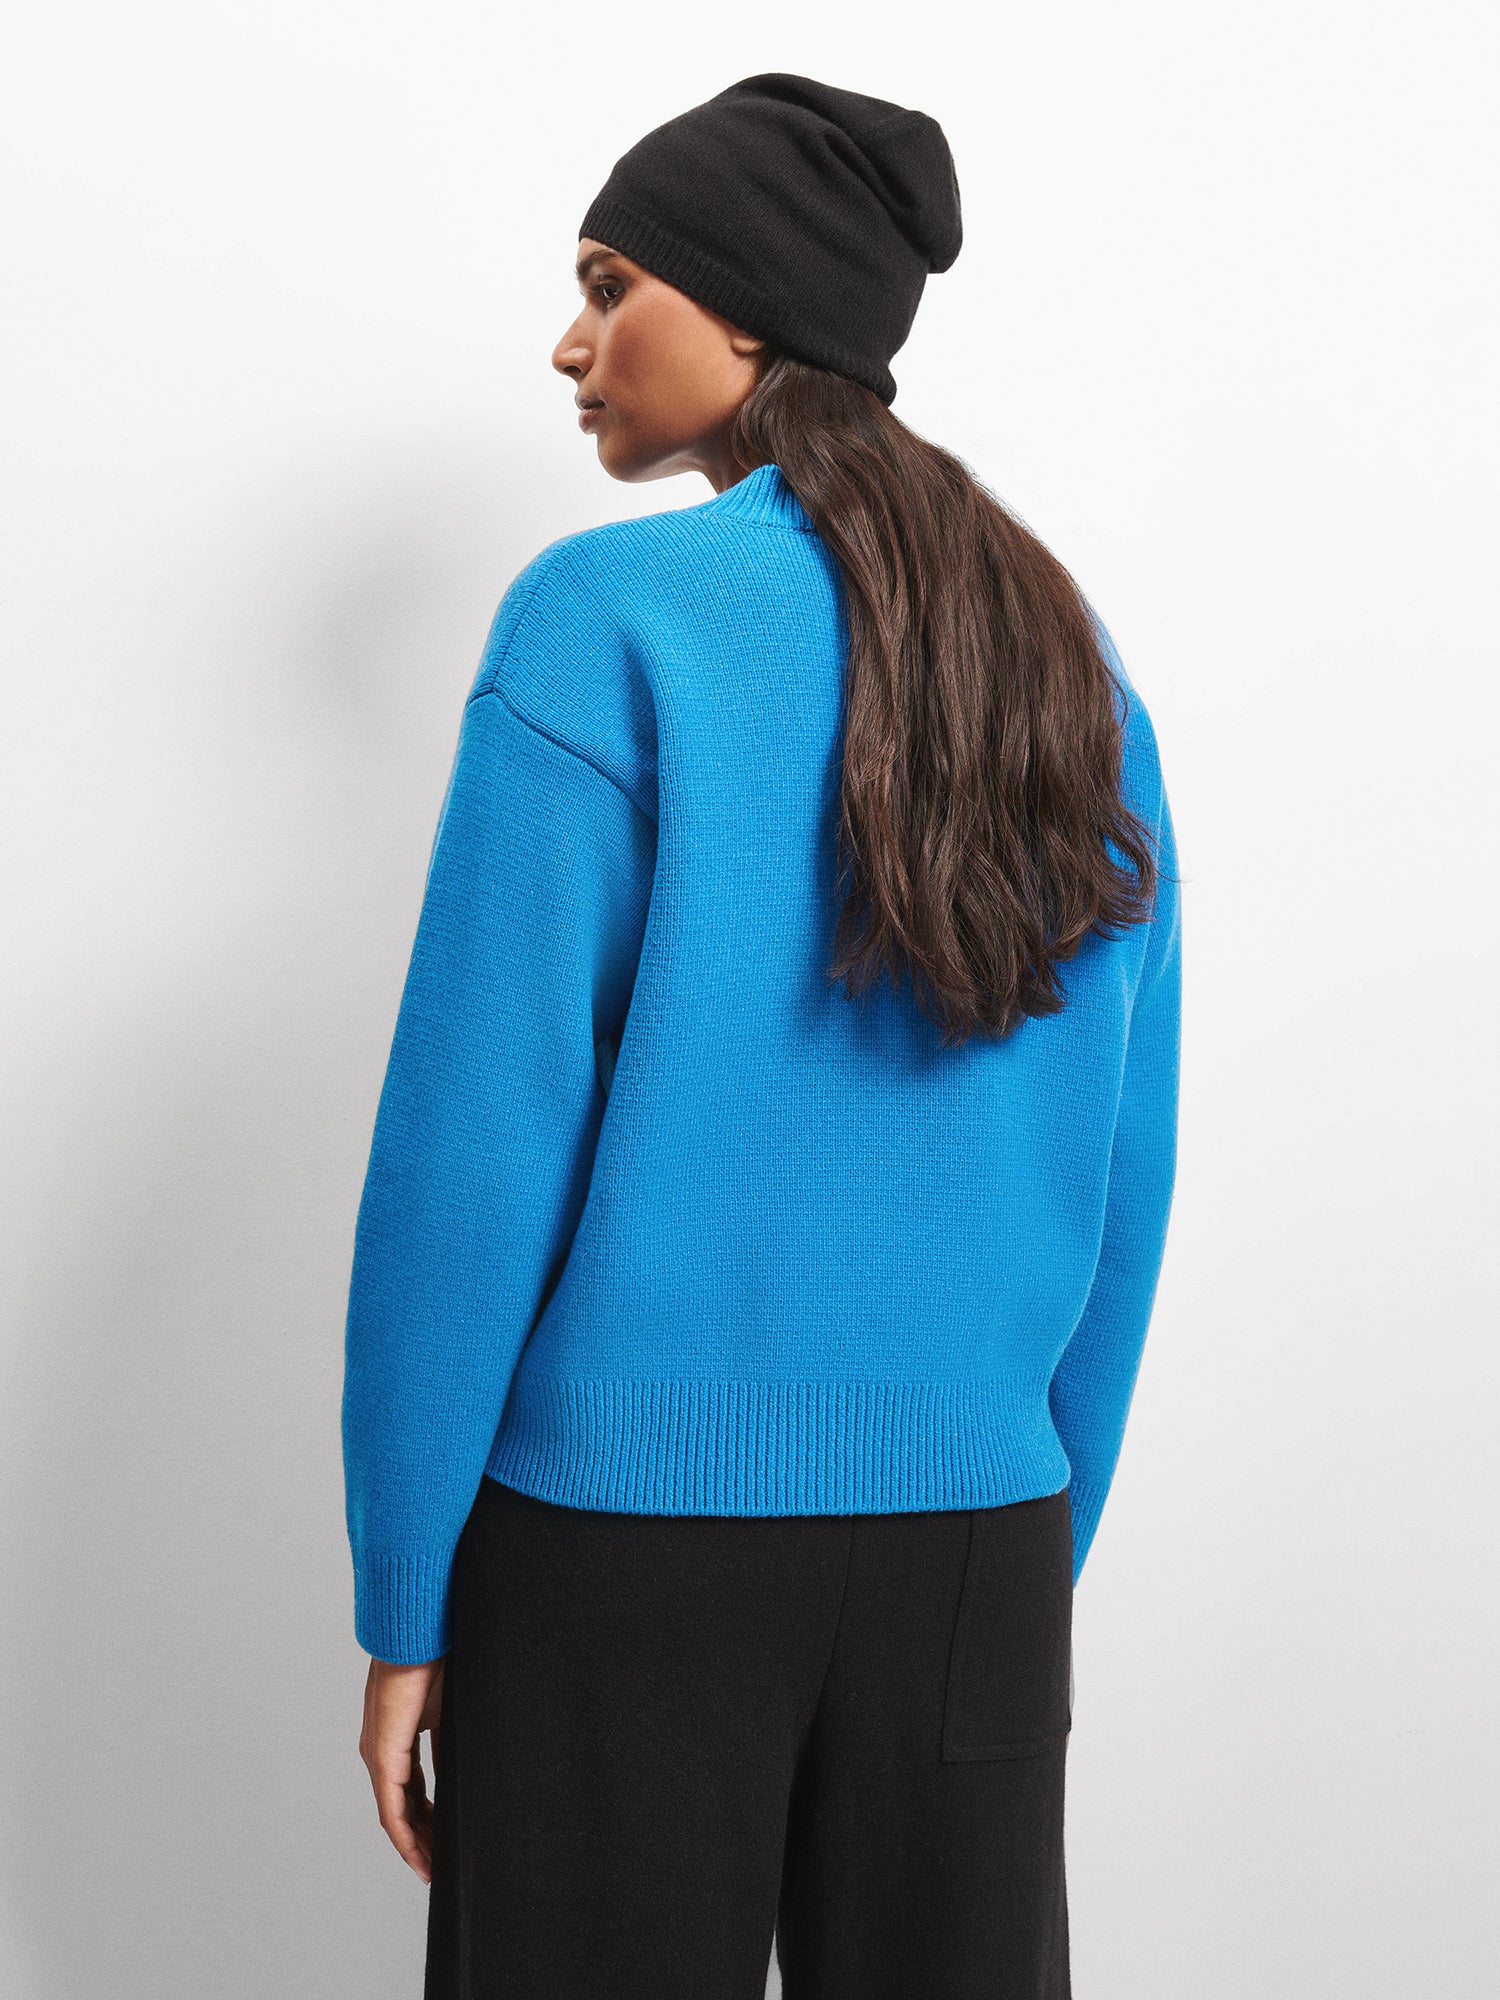 Womens_Recycled_Cashmere_Knit_Crew_NeckSweater_Cerulean_Blue-2